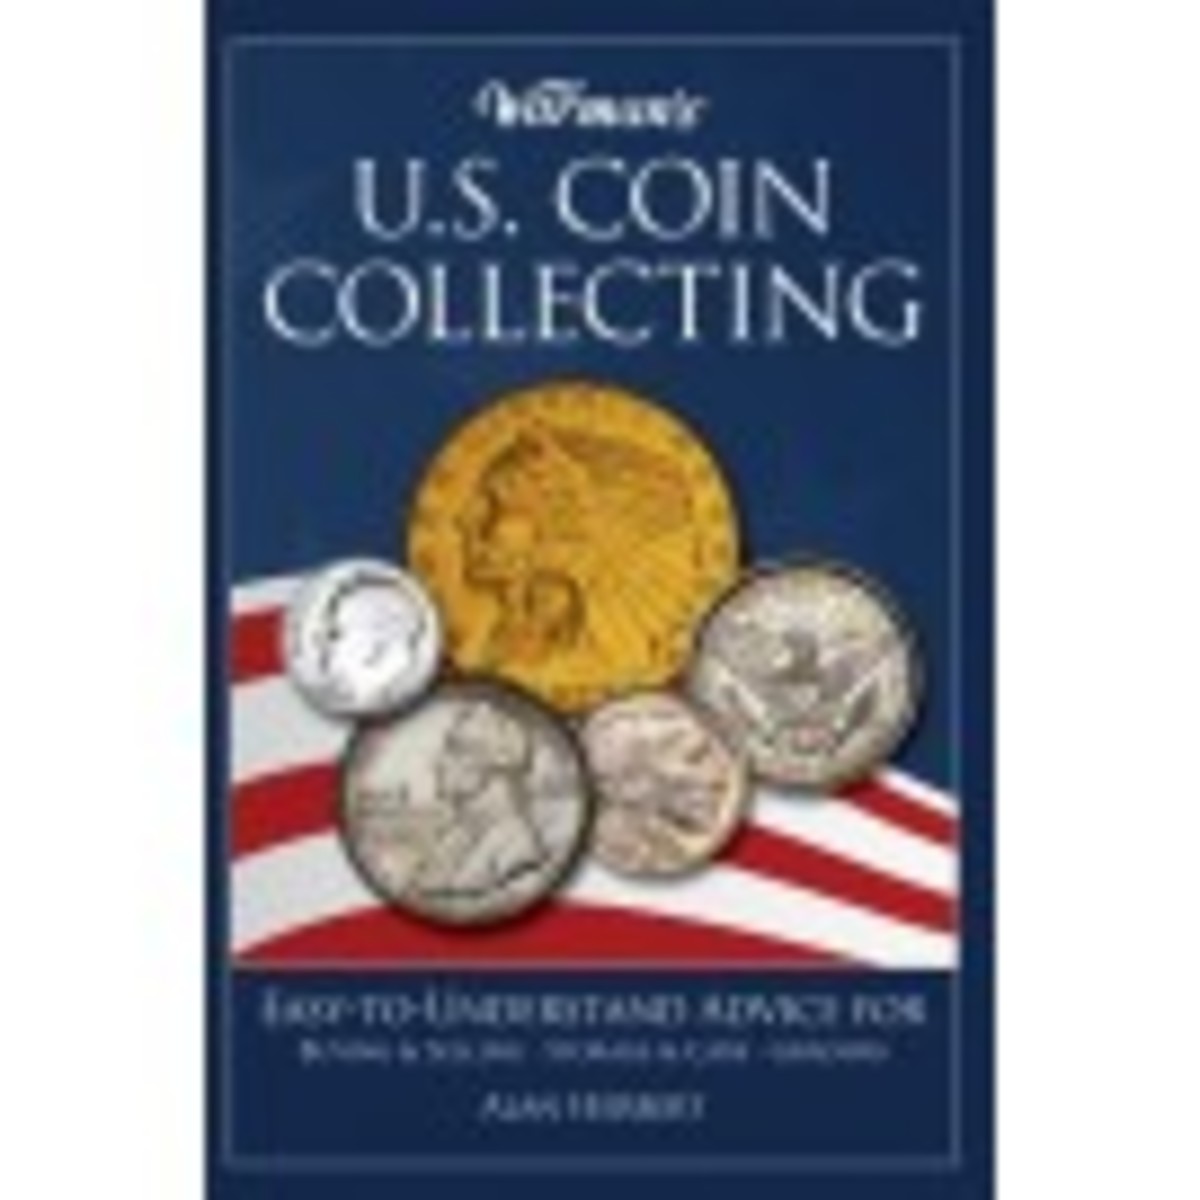 Getting started in coin collecting is as easy as 1, 2, 3 when you get your advice straight from the Answer Man of coin collecting.